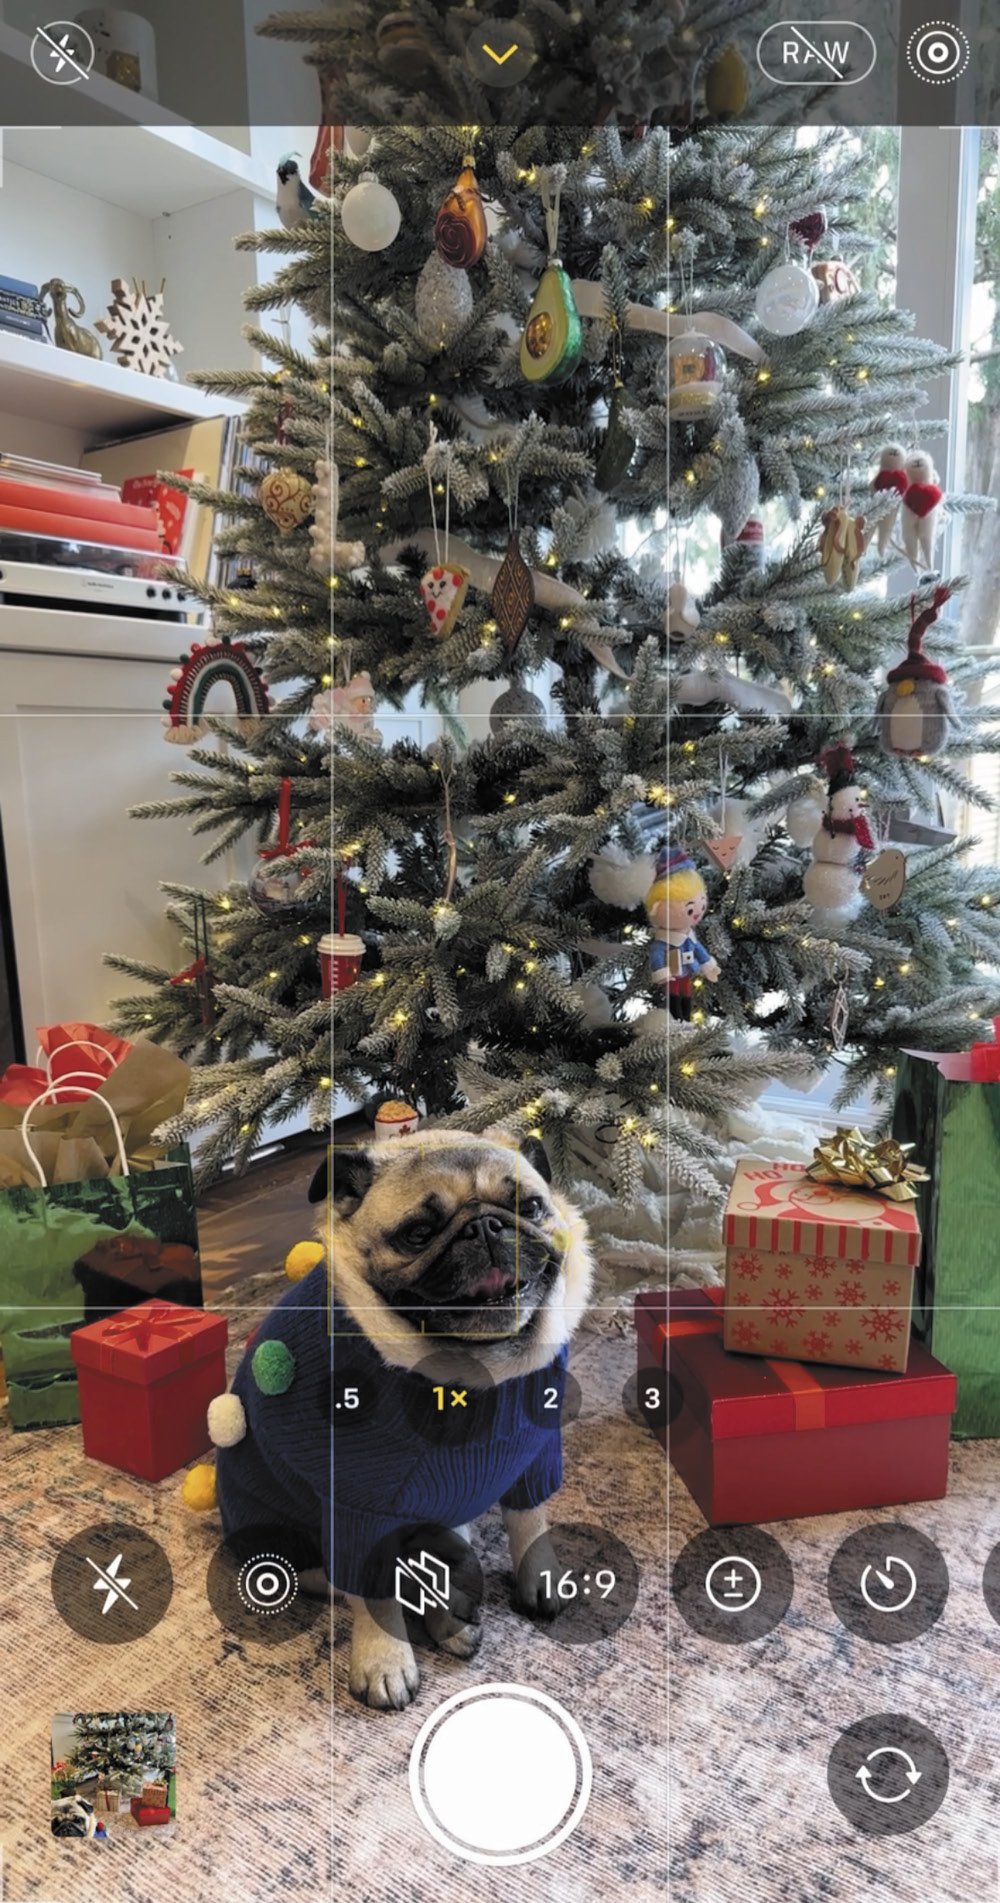 A photo of a pug under a Christmas tree, with gridlines from the camera app. 